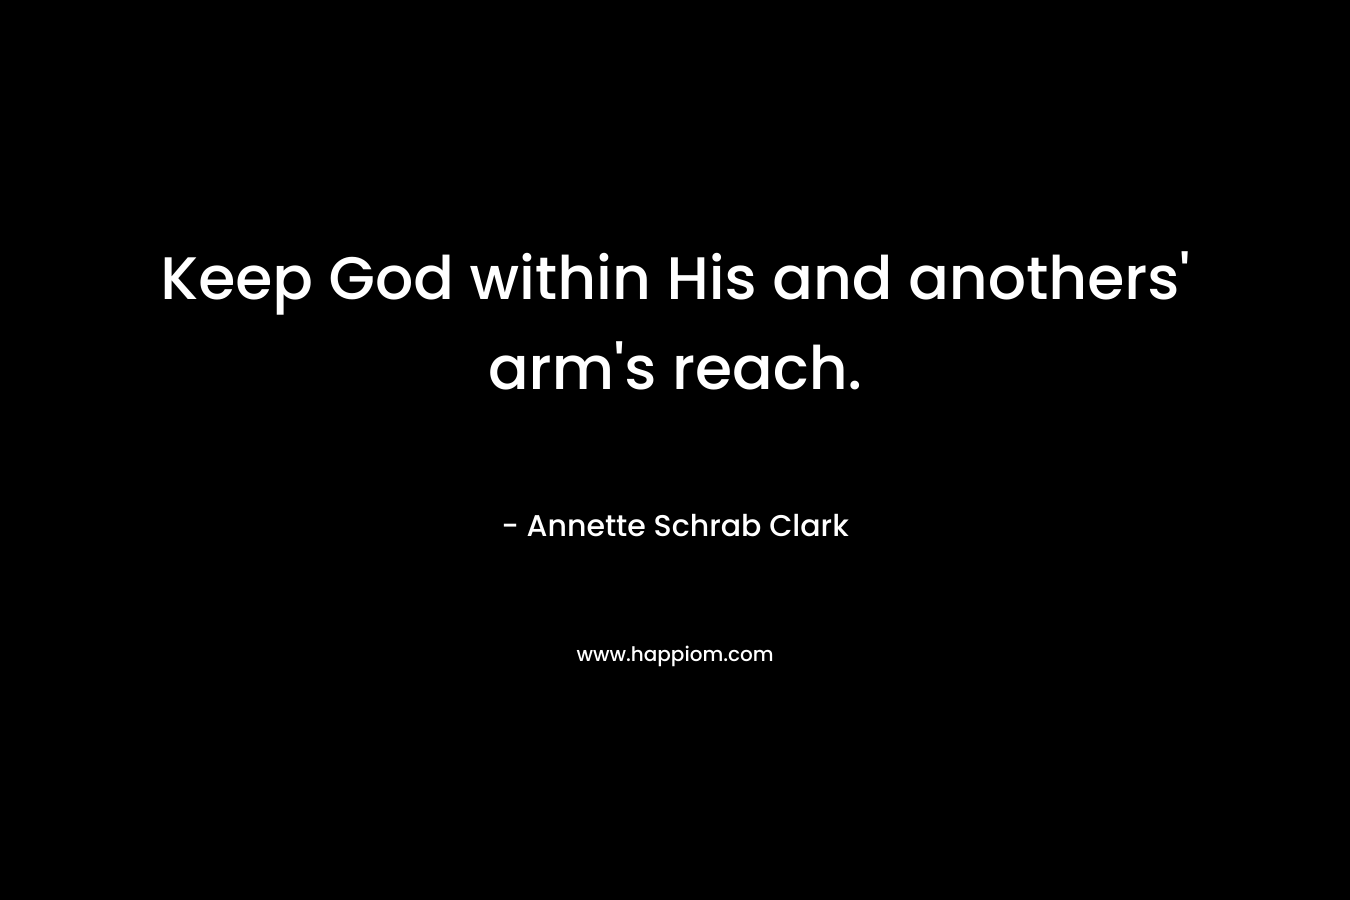 Keep God within His and anothers' arm's reach.